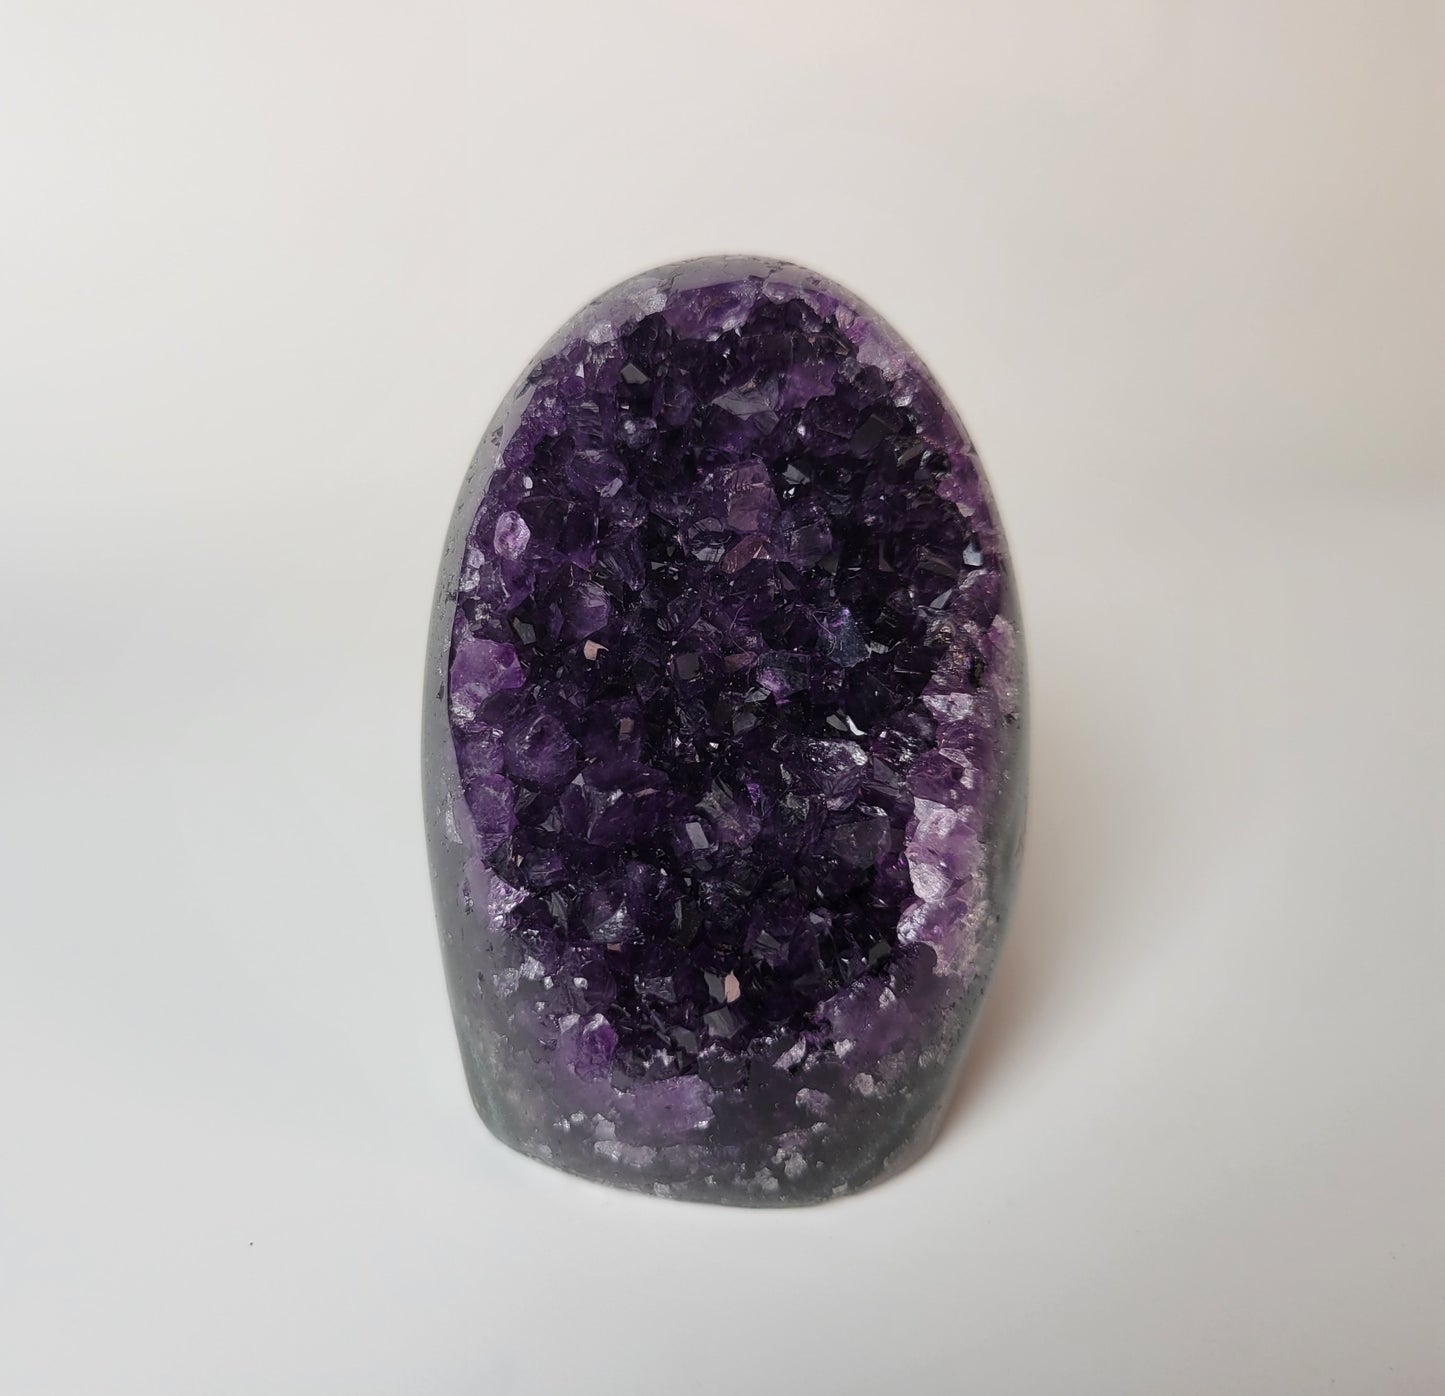 Grape Amethyst Cut Base from Uruguay, Partially Polished (W 1 7/8 X D 2 X H 2 5/8 inches)